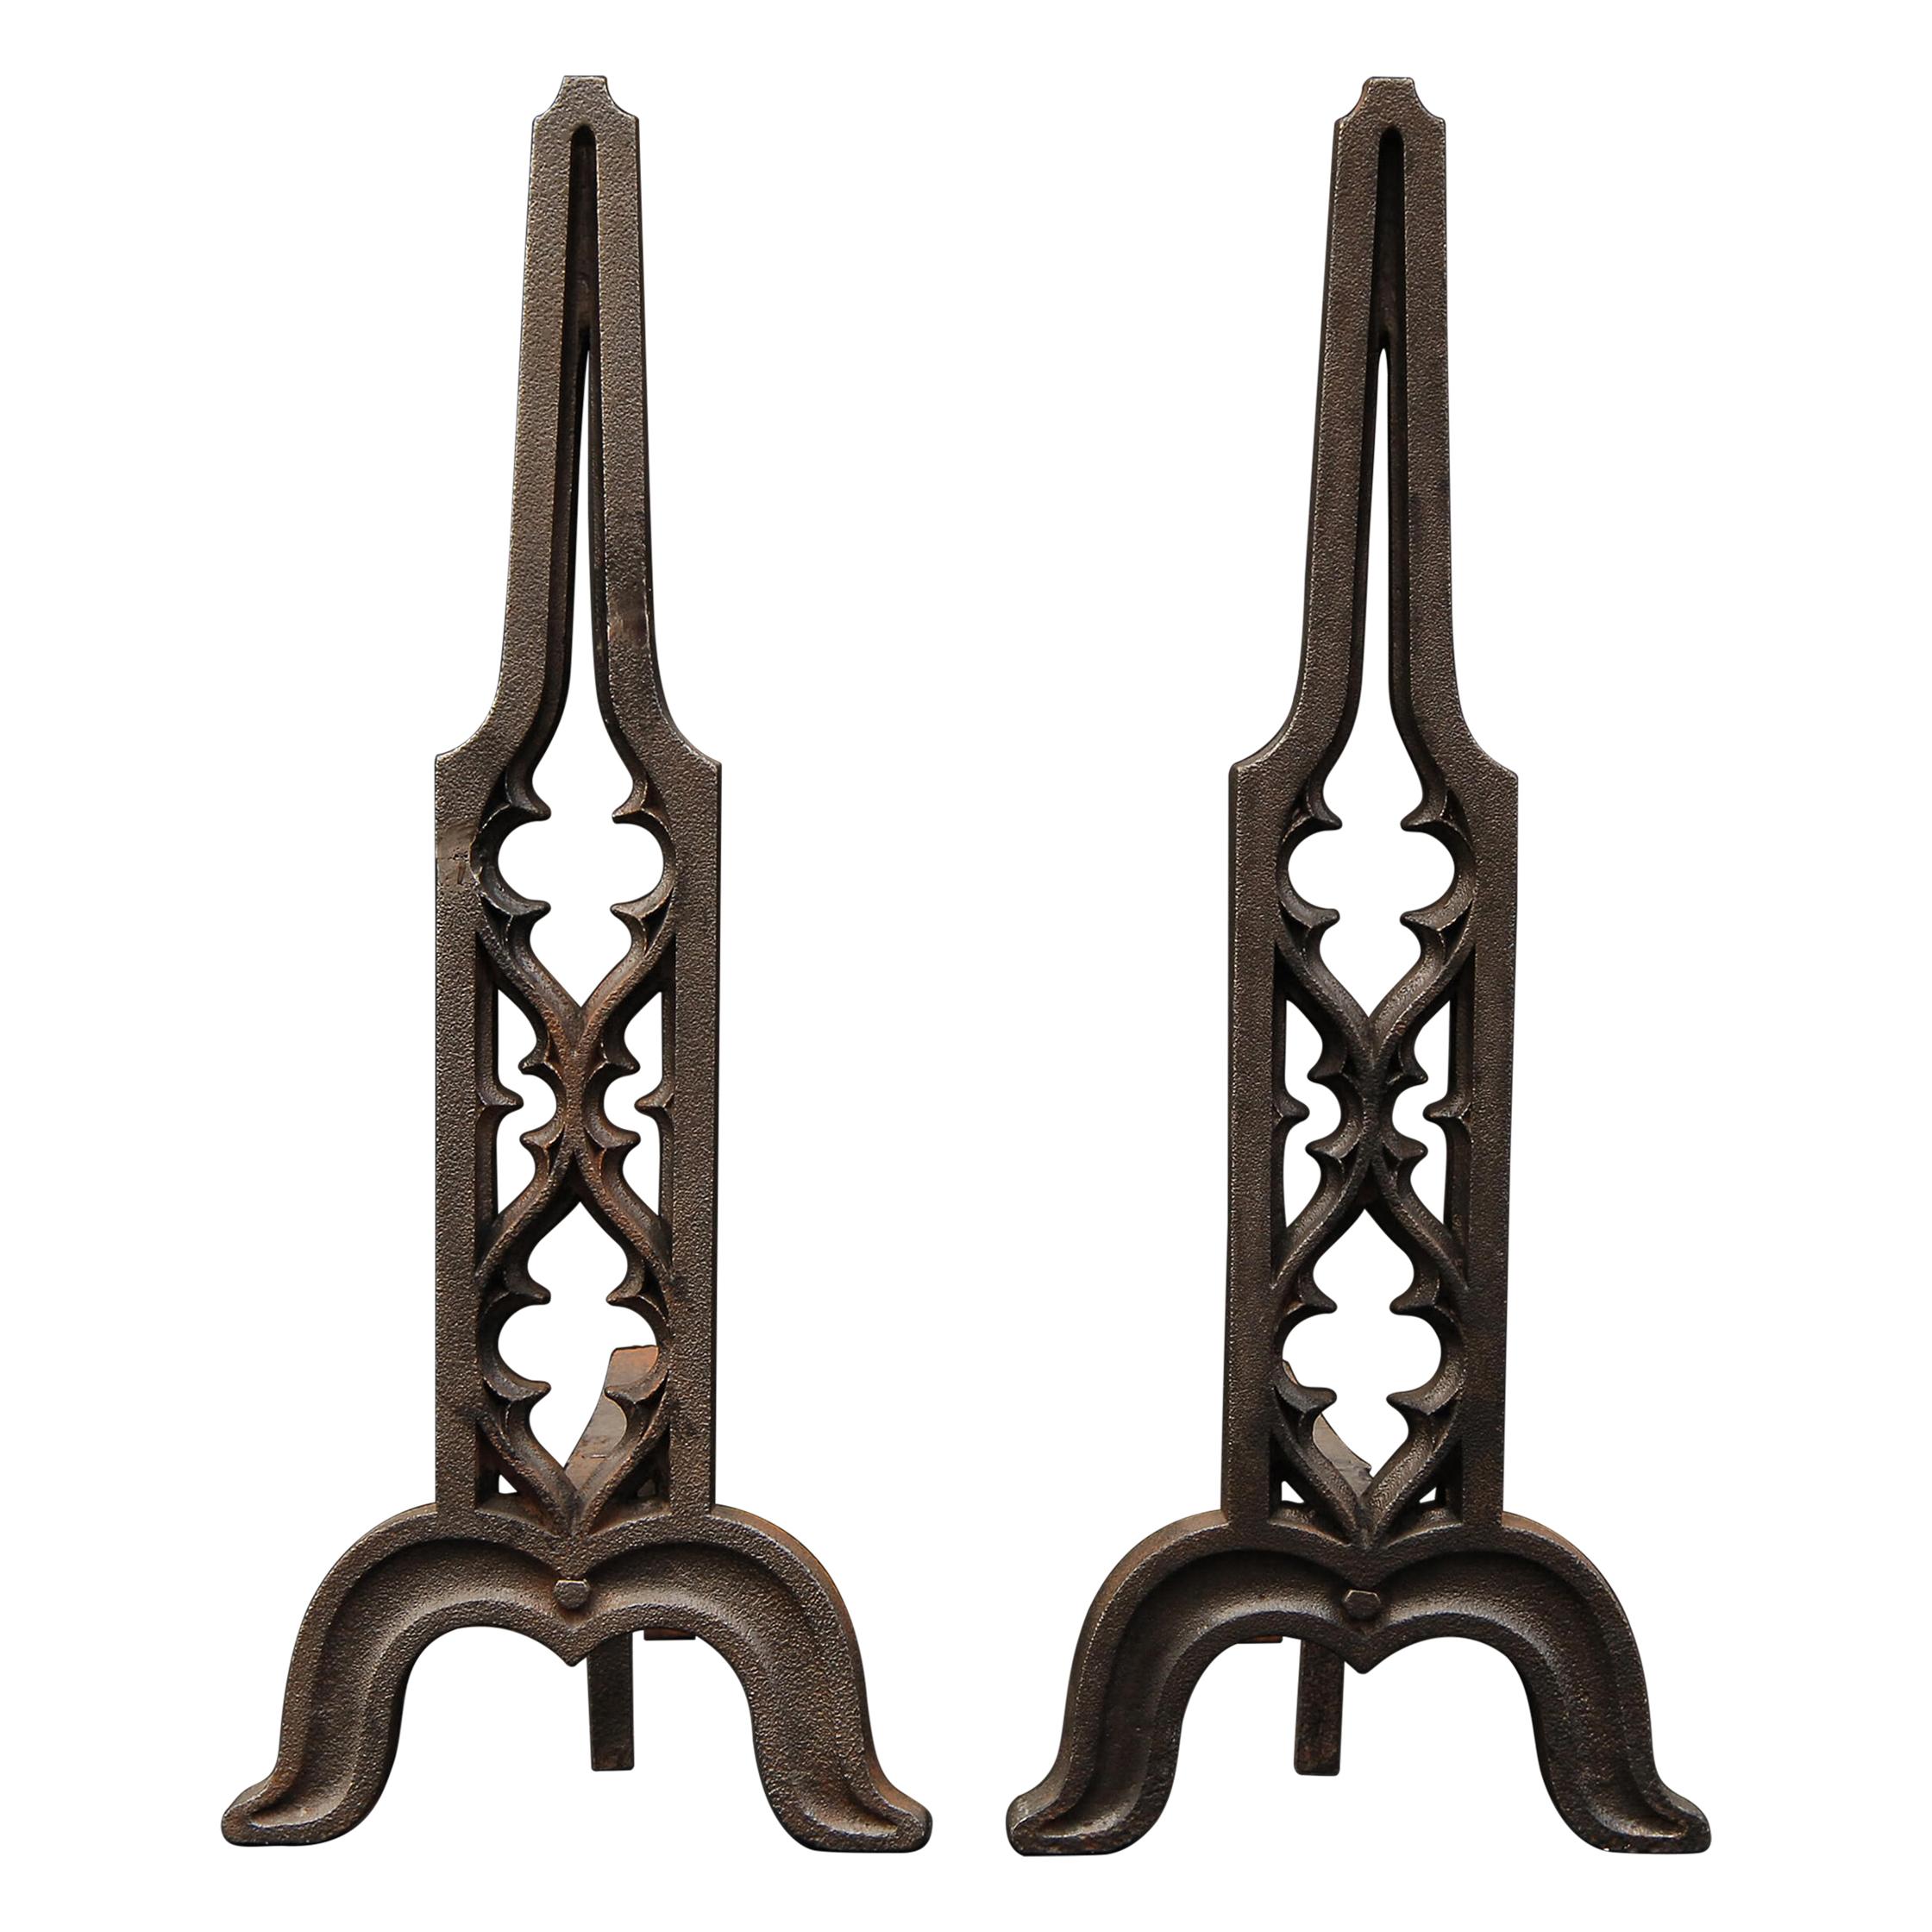 Pair of Gothic Revival Cast Iron Firedogs For Sale